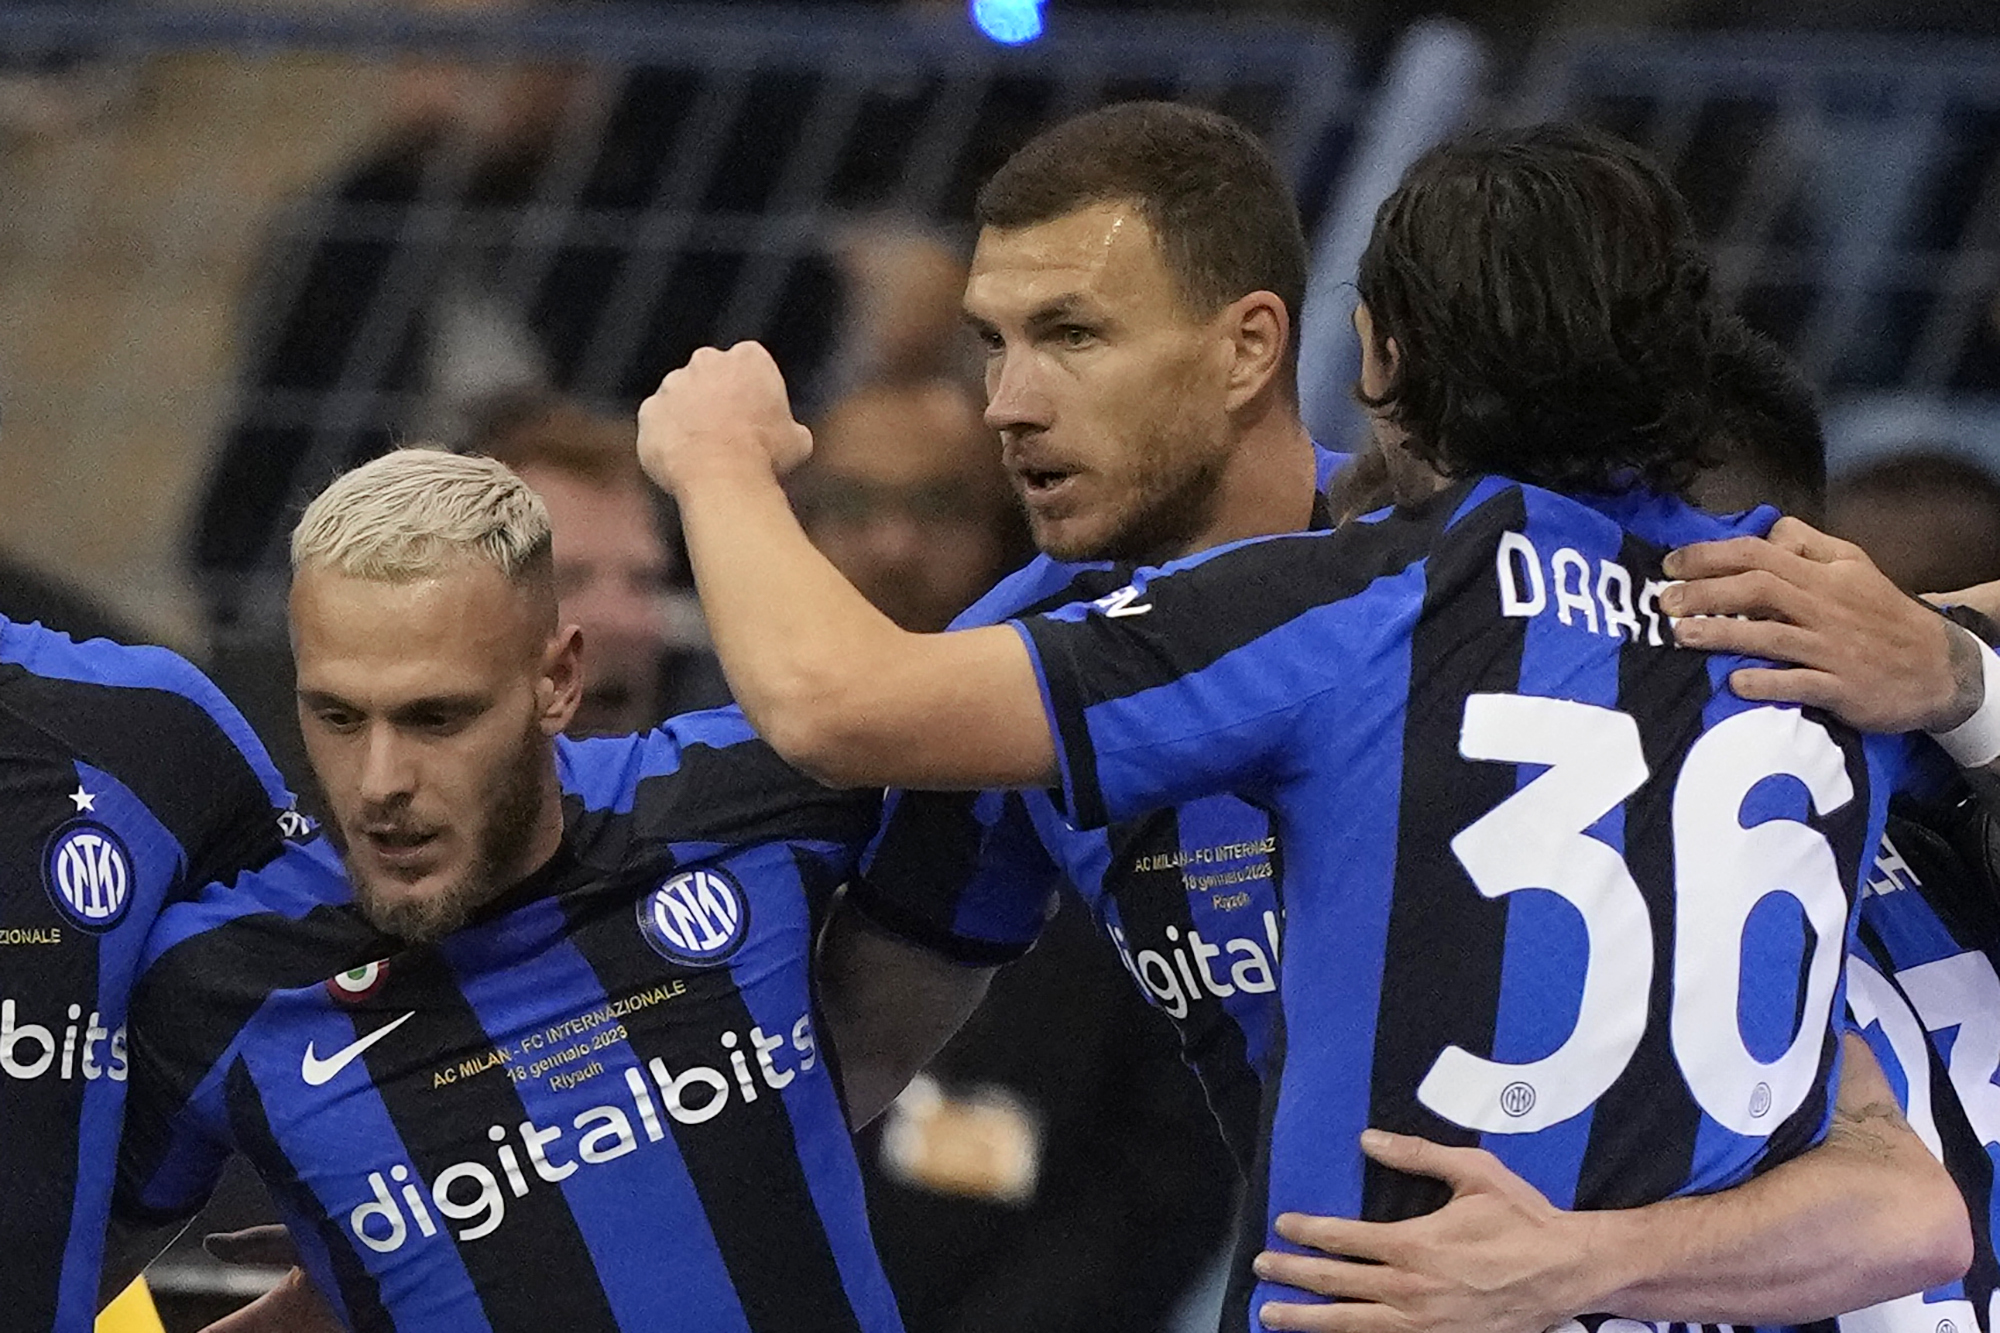 Inter Milan sets up Italian Super Cup final with Napoli in Saudi Arabia